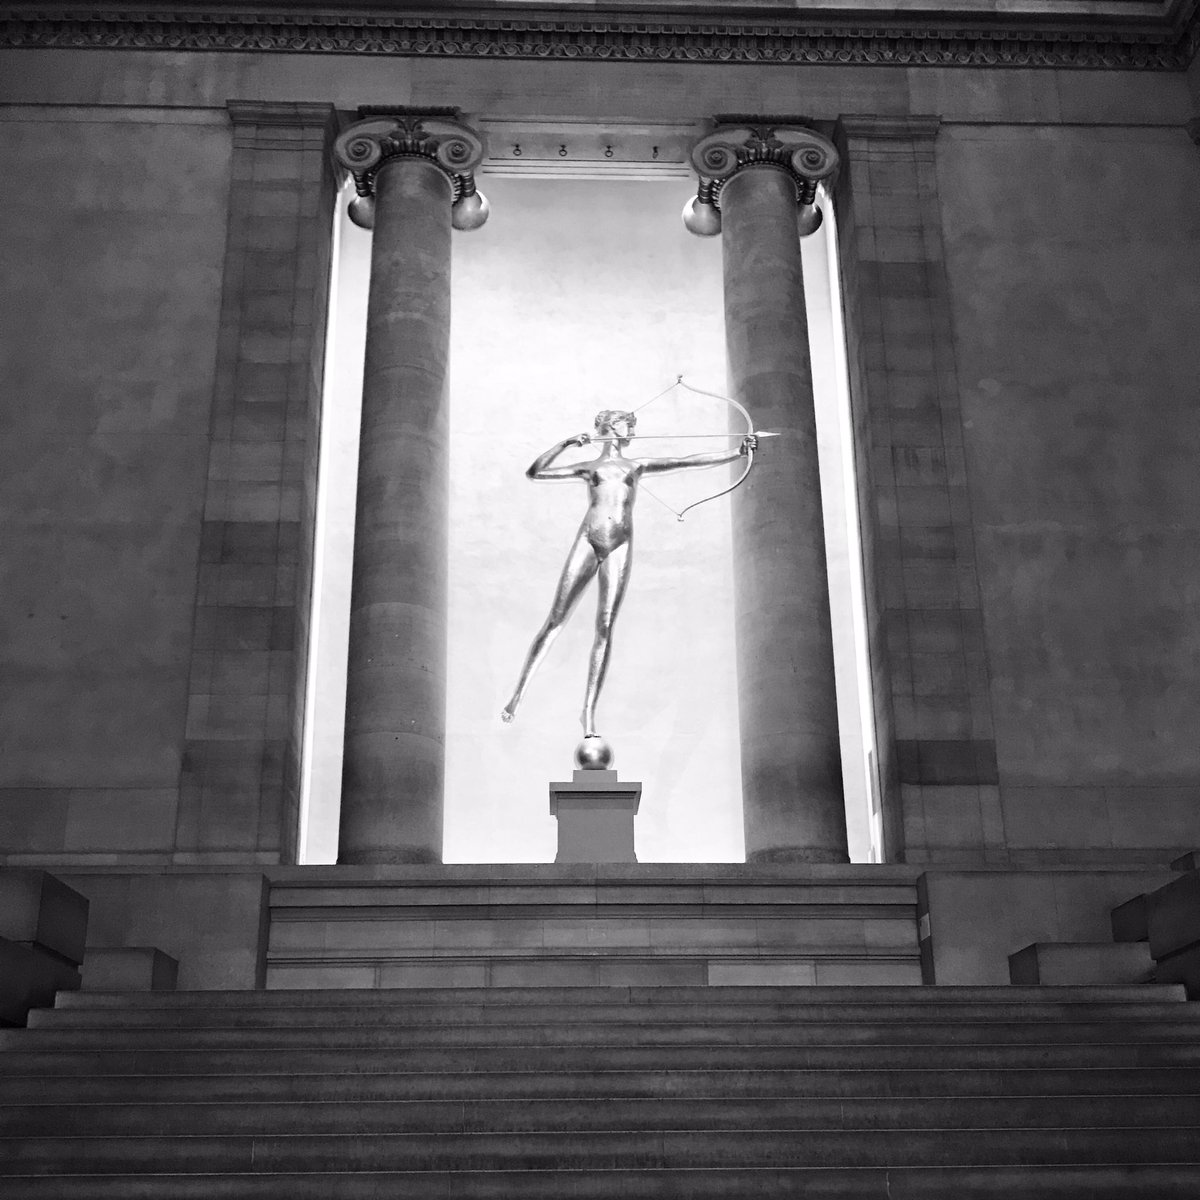 #Diana looking good as usual :) - Nothing like being a tourist in your own city.  #philly #phillyartmuseum #wanderlust  #artsy